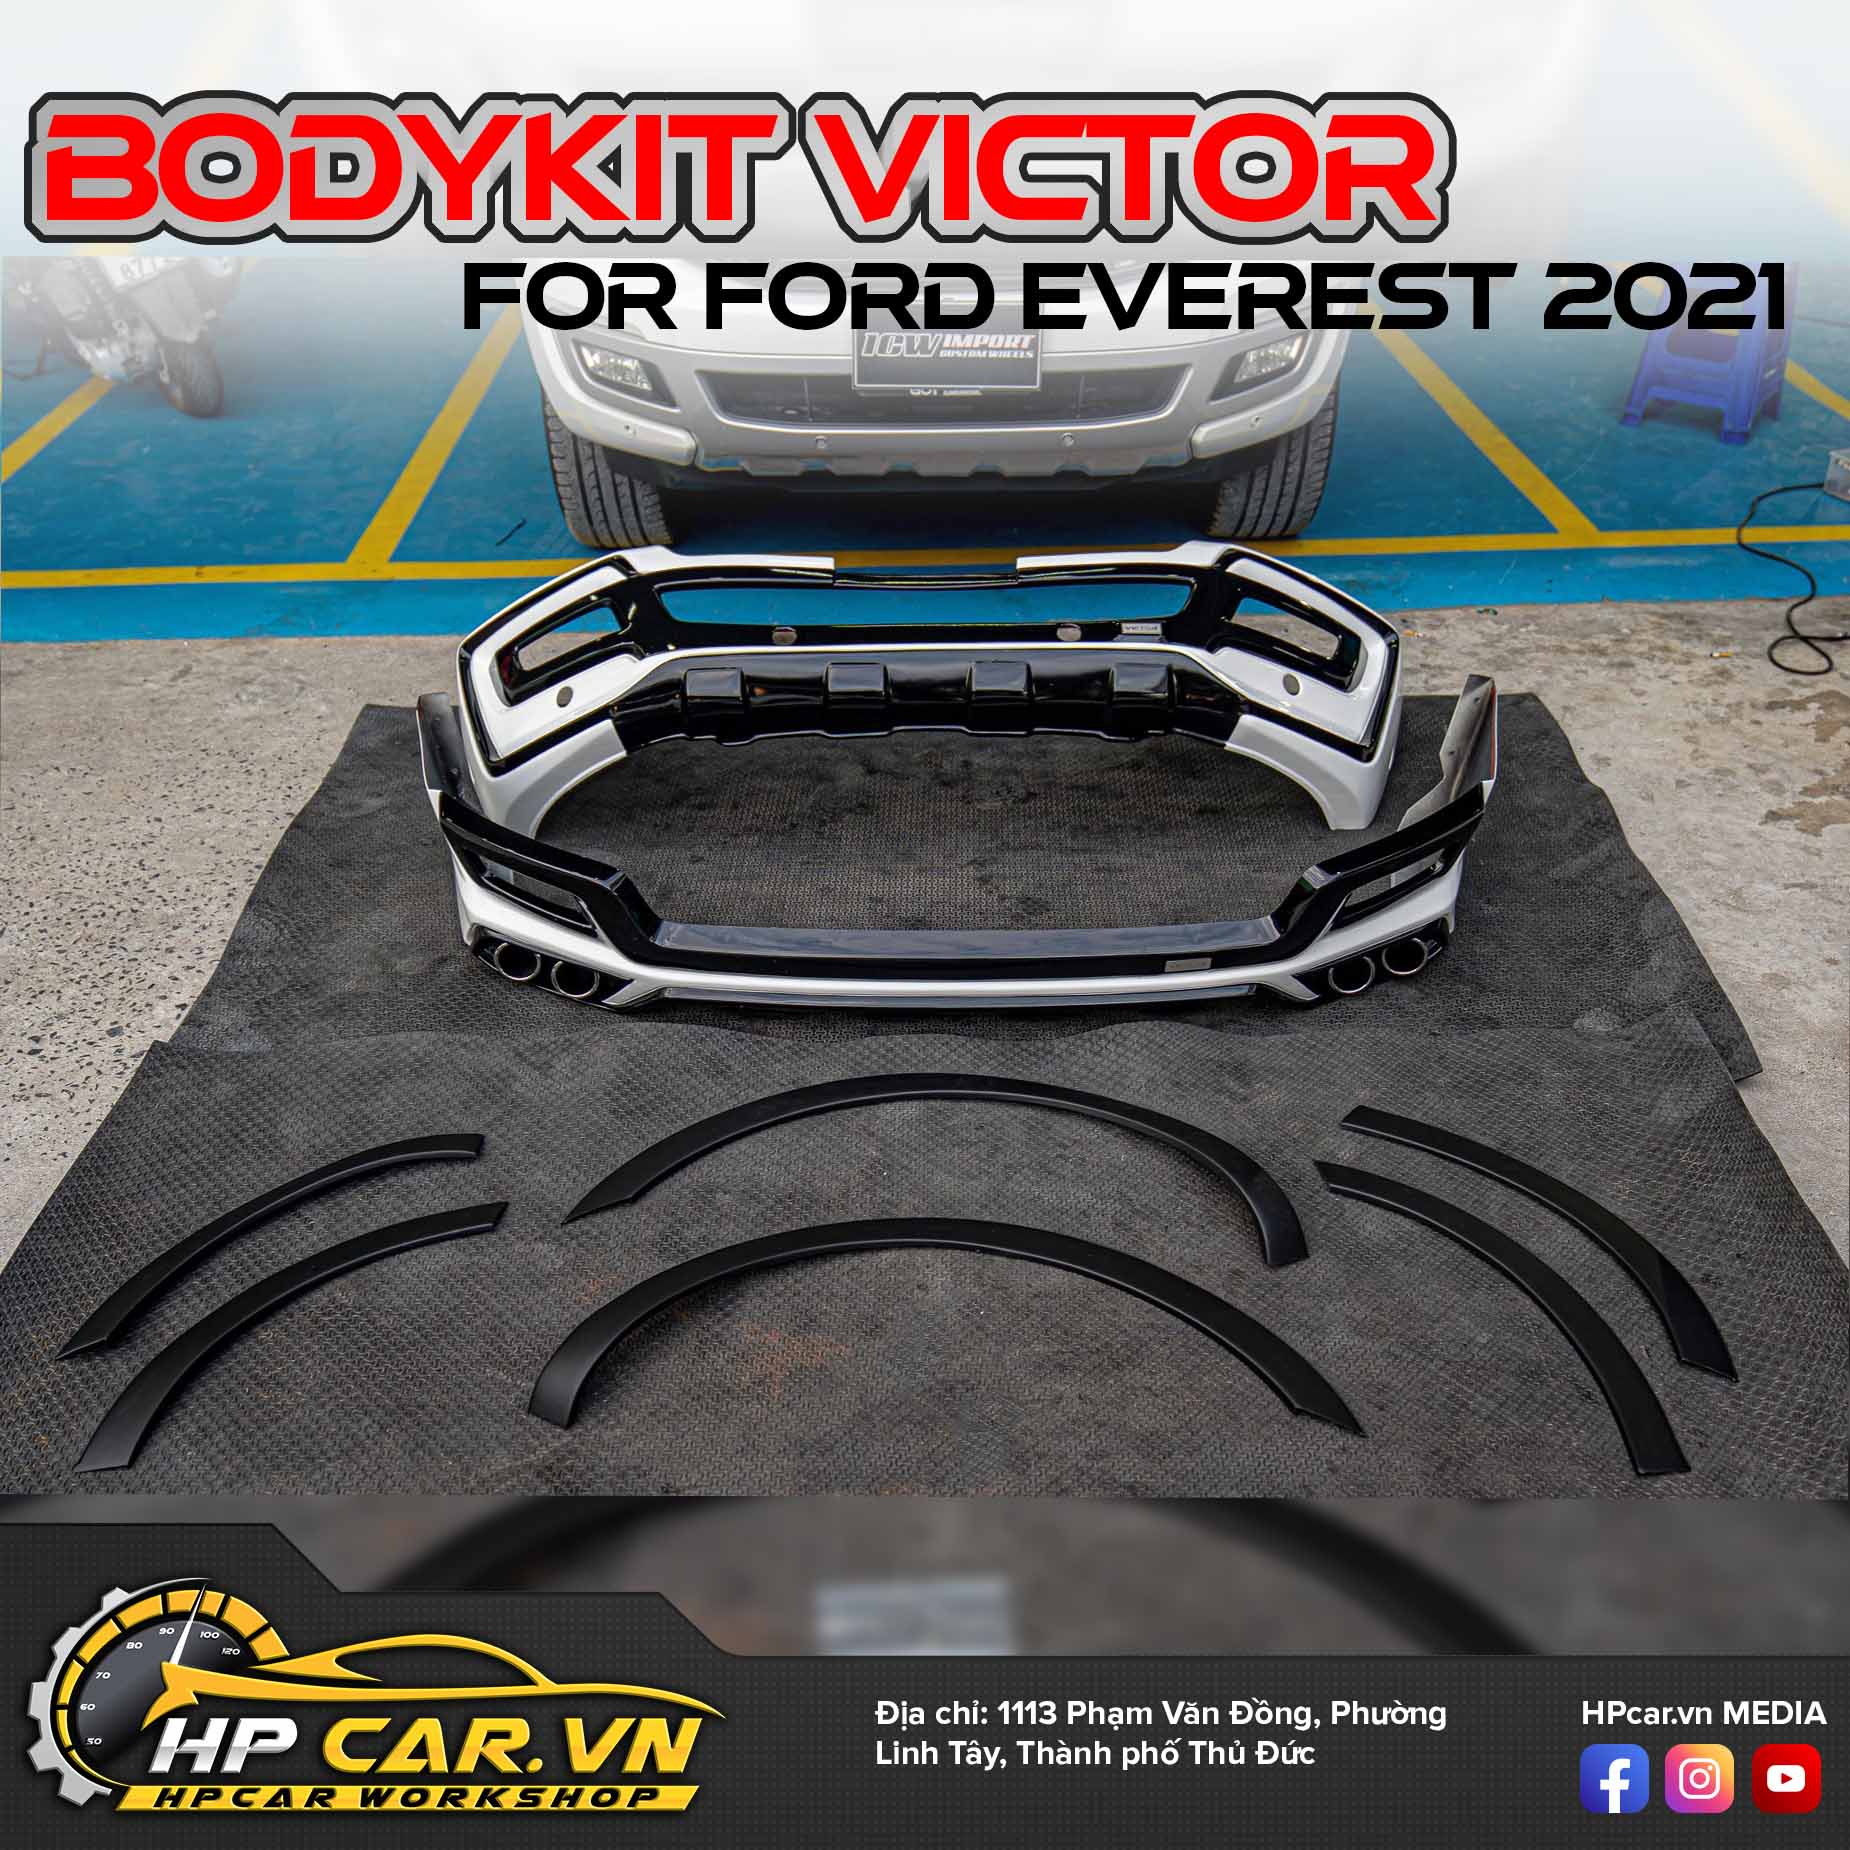 bodykit victor ford everest 2021 tai hcm